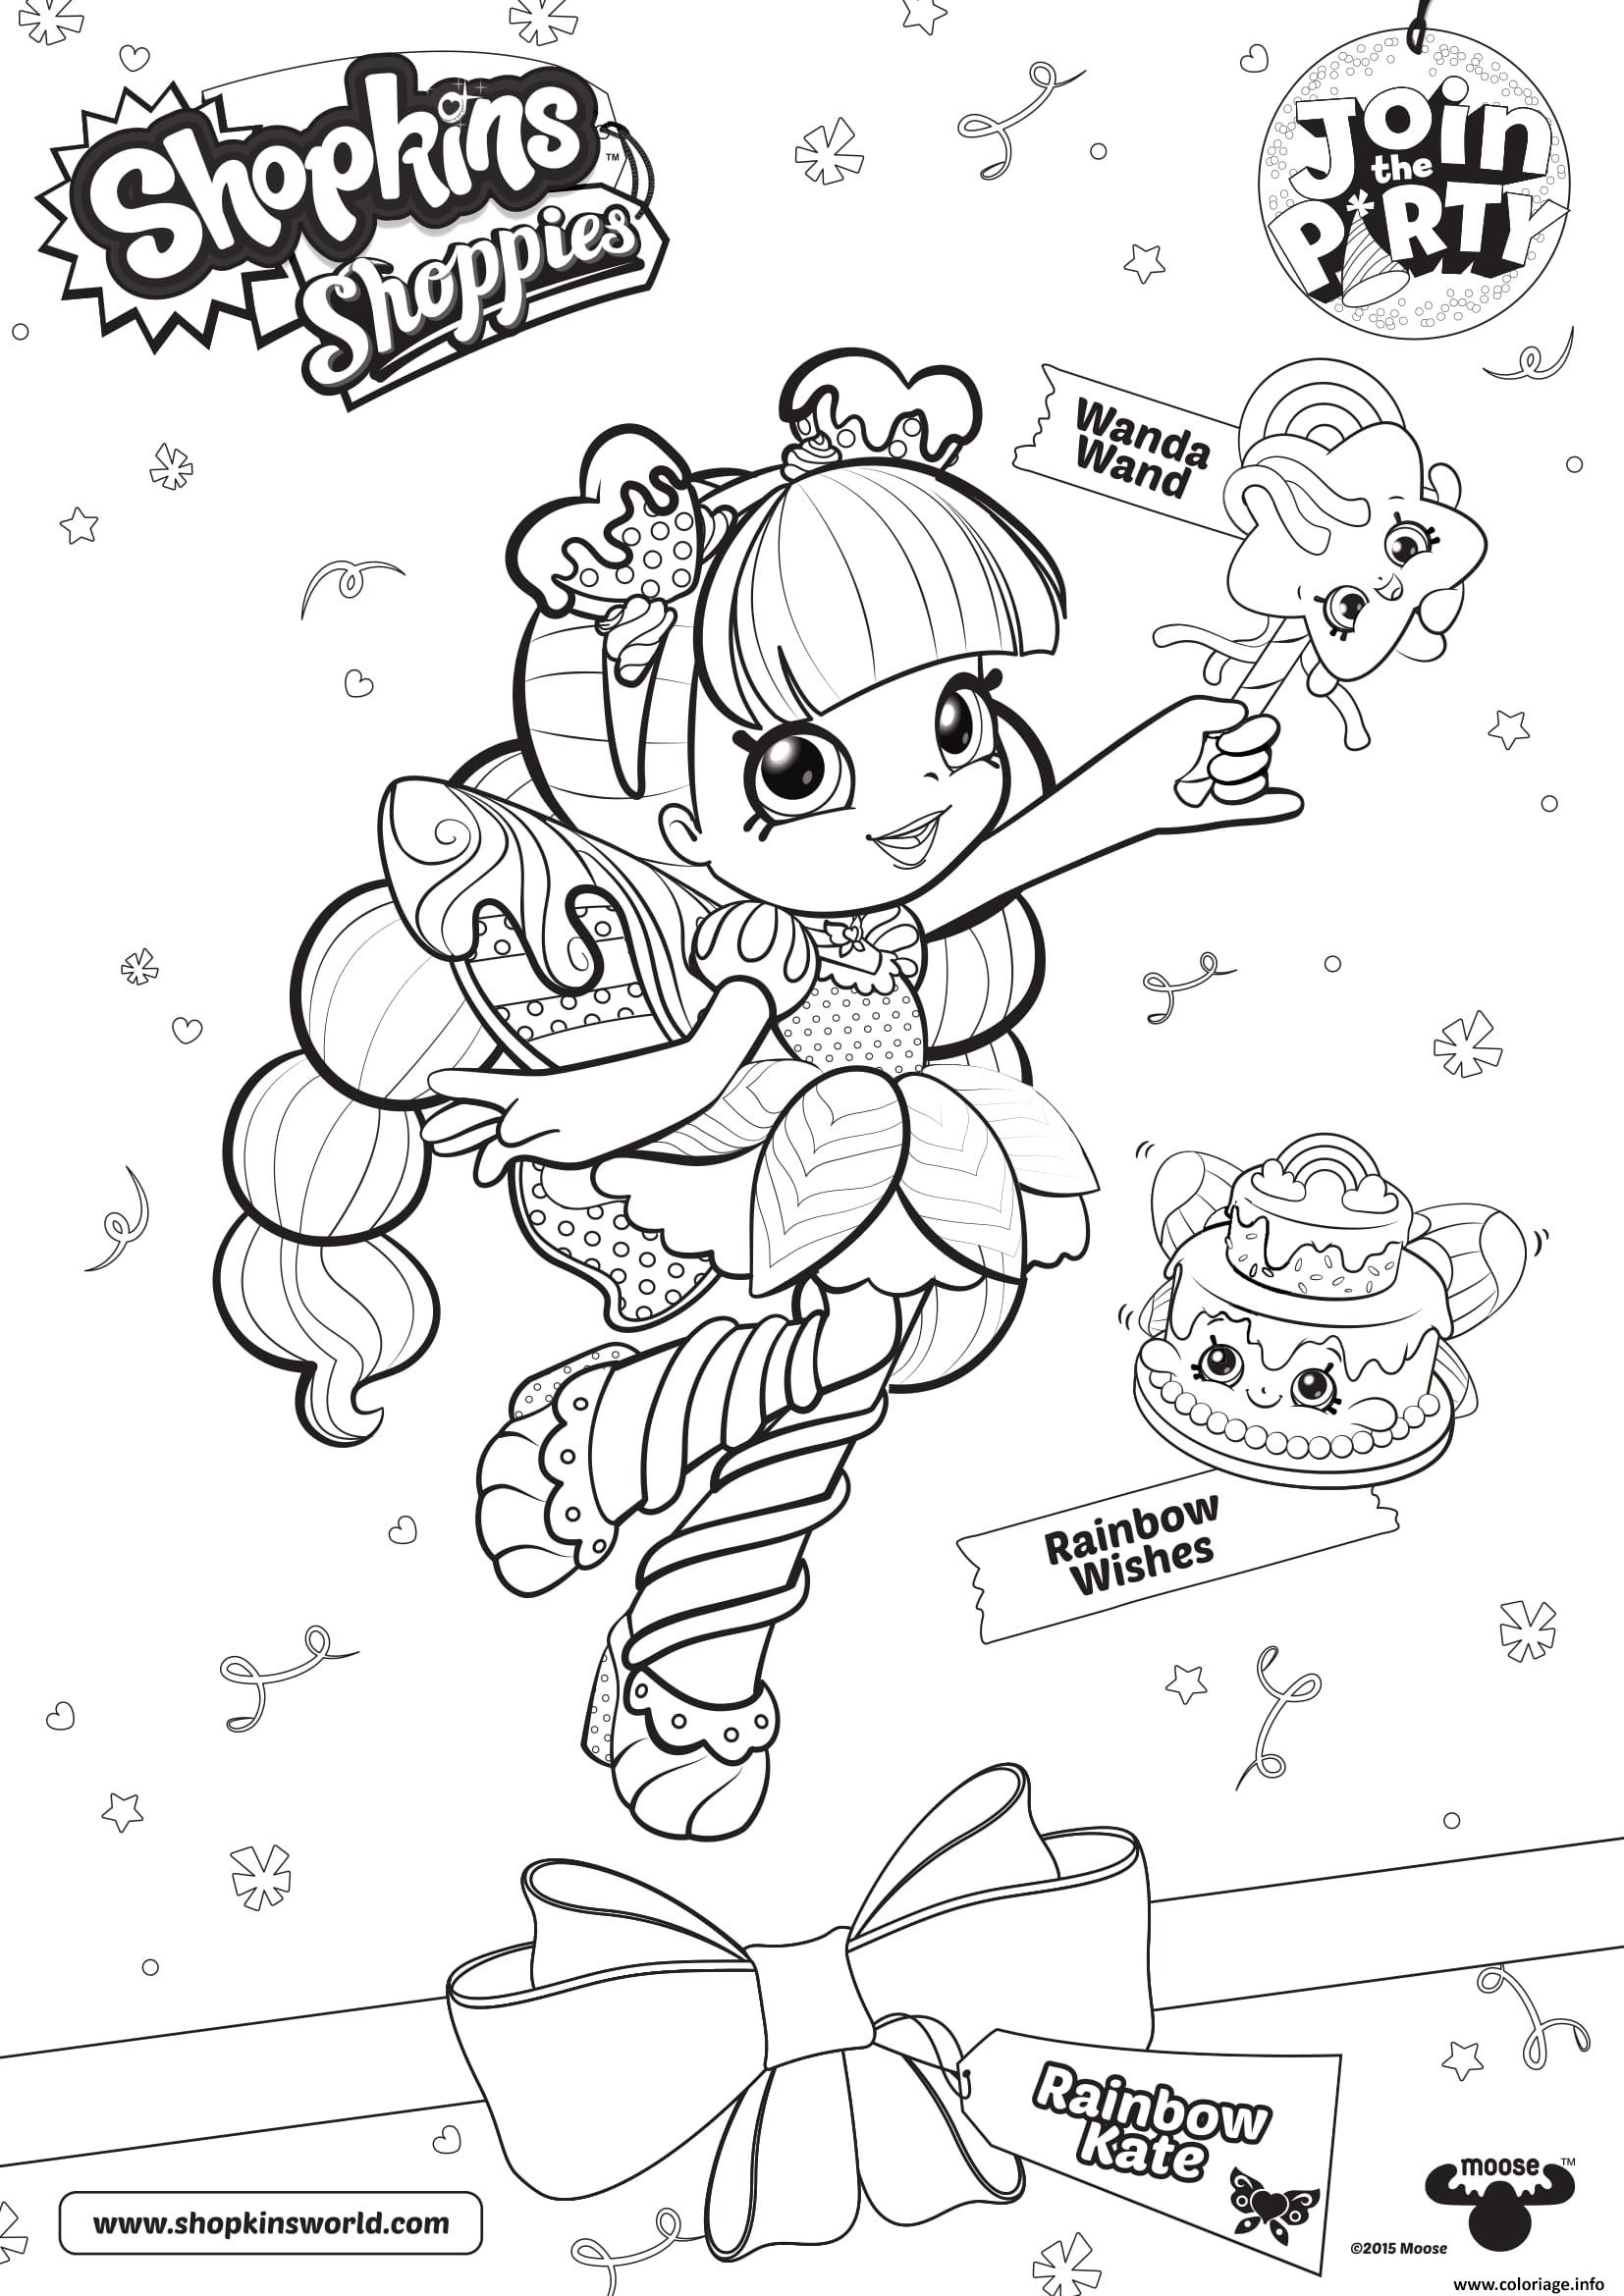 Coloriage Shopkins Shoppies Join The Party Wanda Wand Rainbow Wishes Dessin à Imprimer